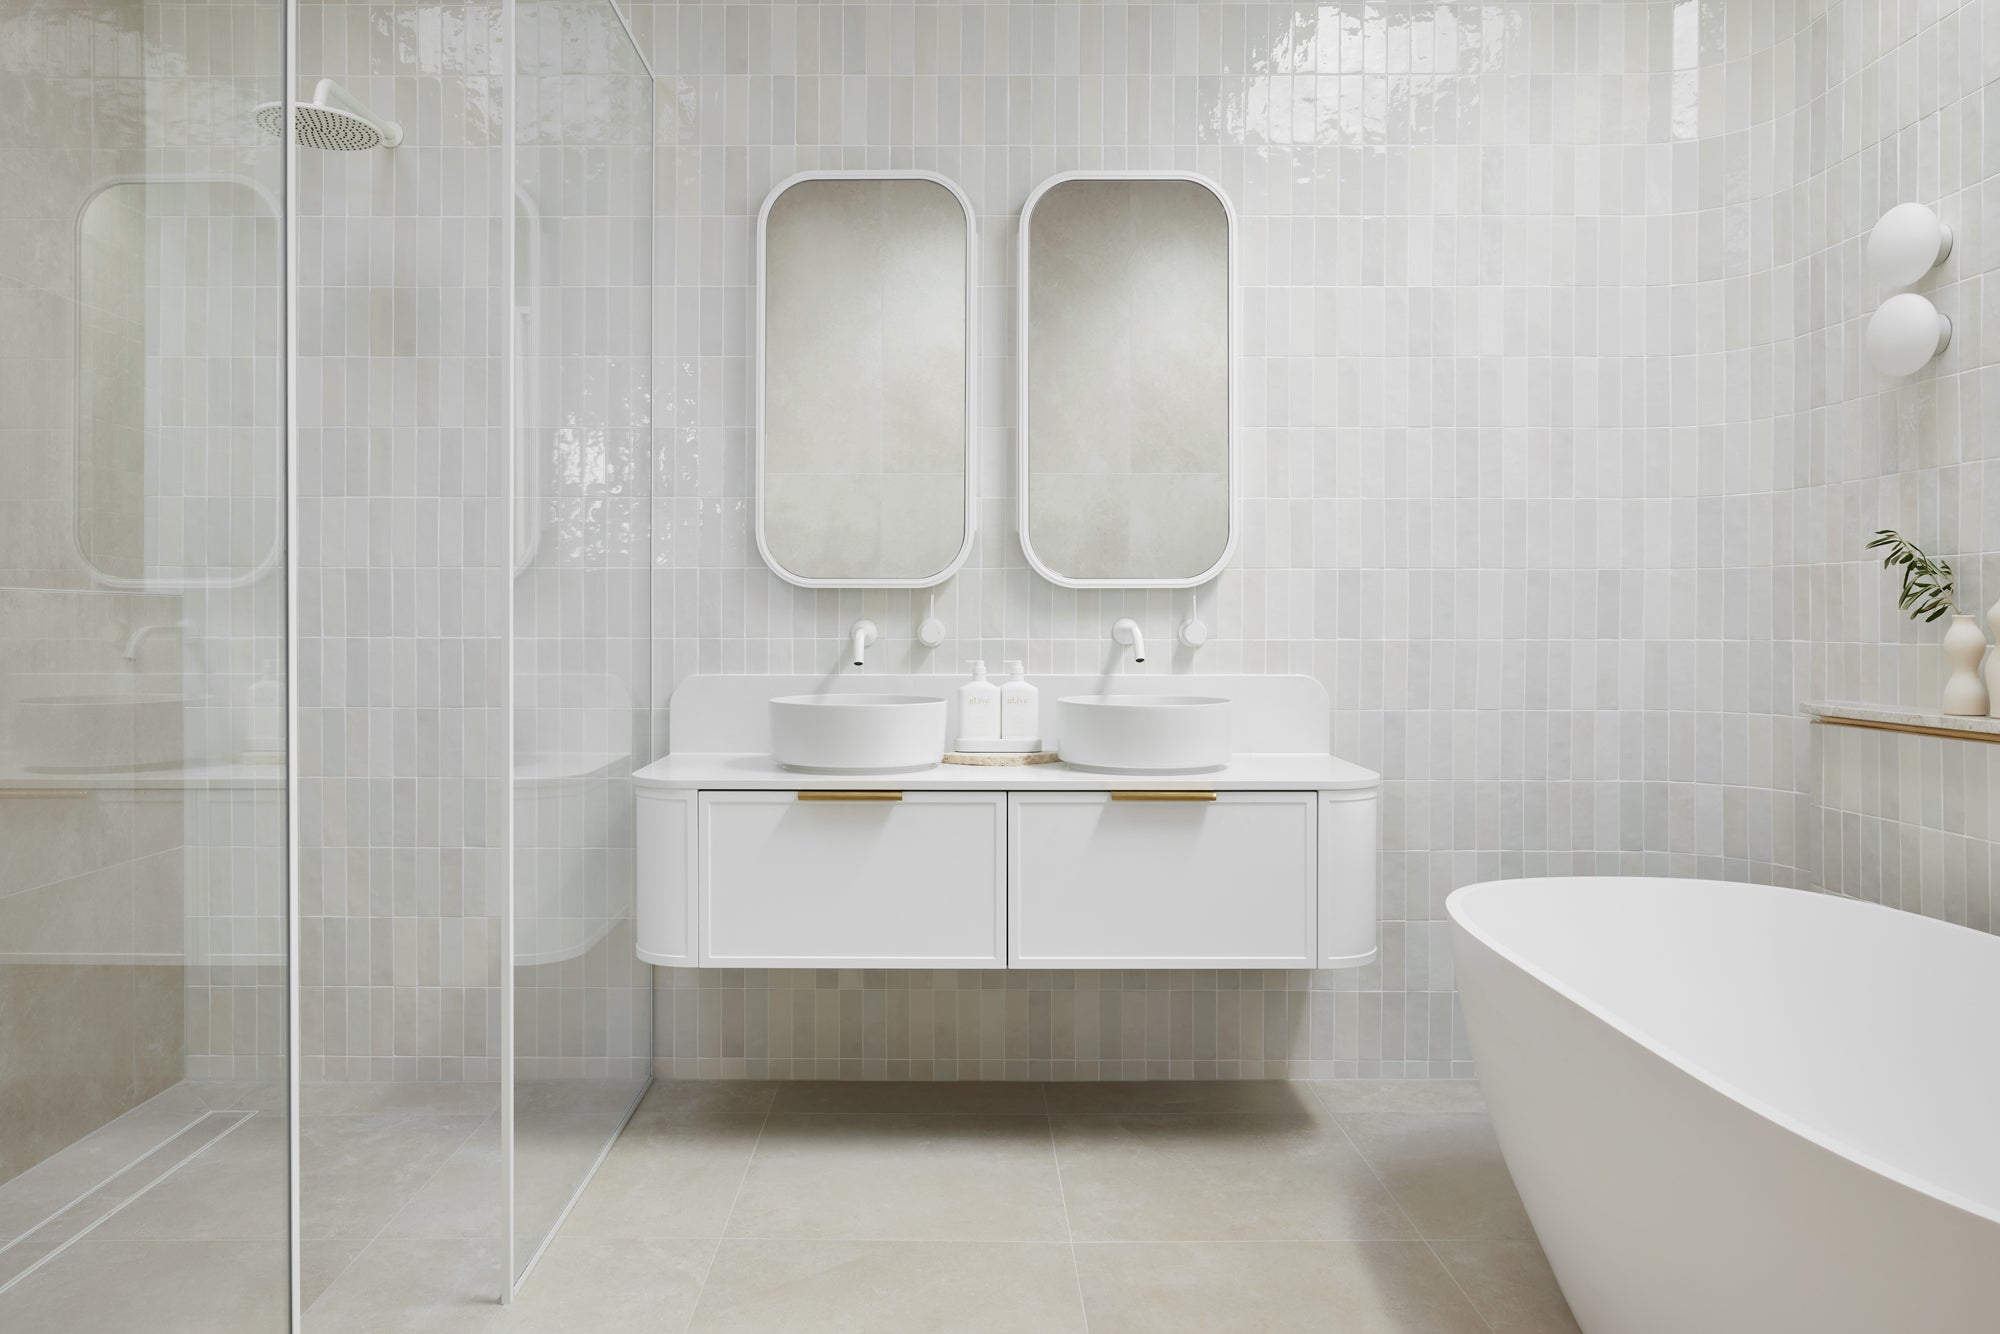 Designing Our Forever Bathrooms with Reece: Where Function Meets Beauty